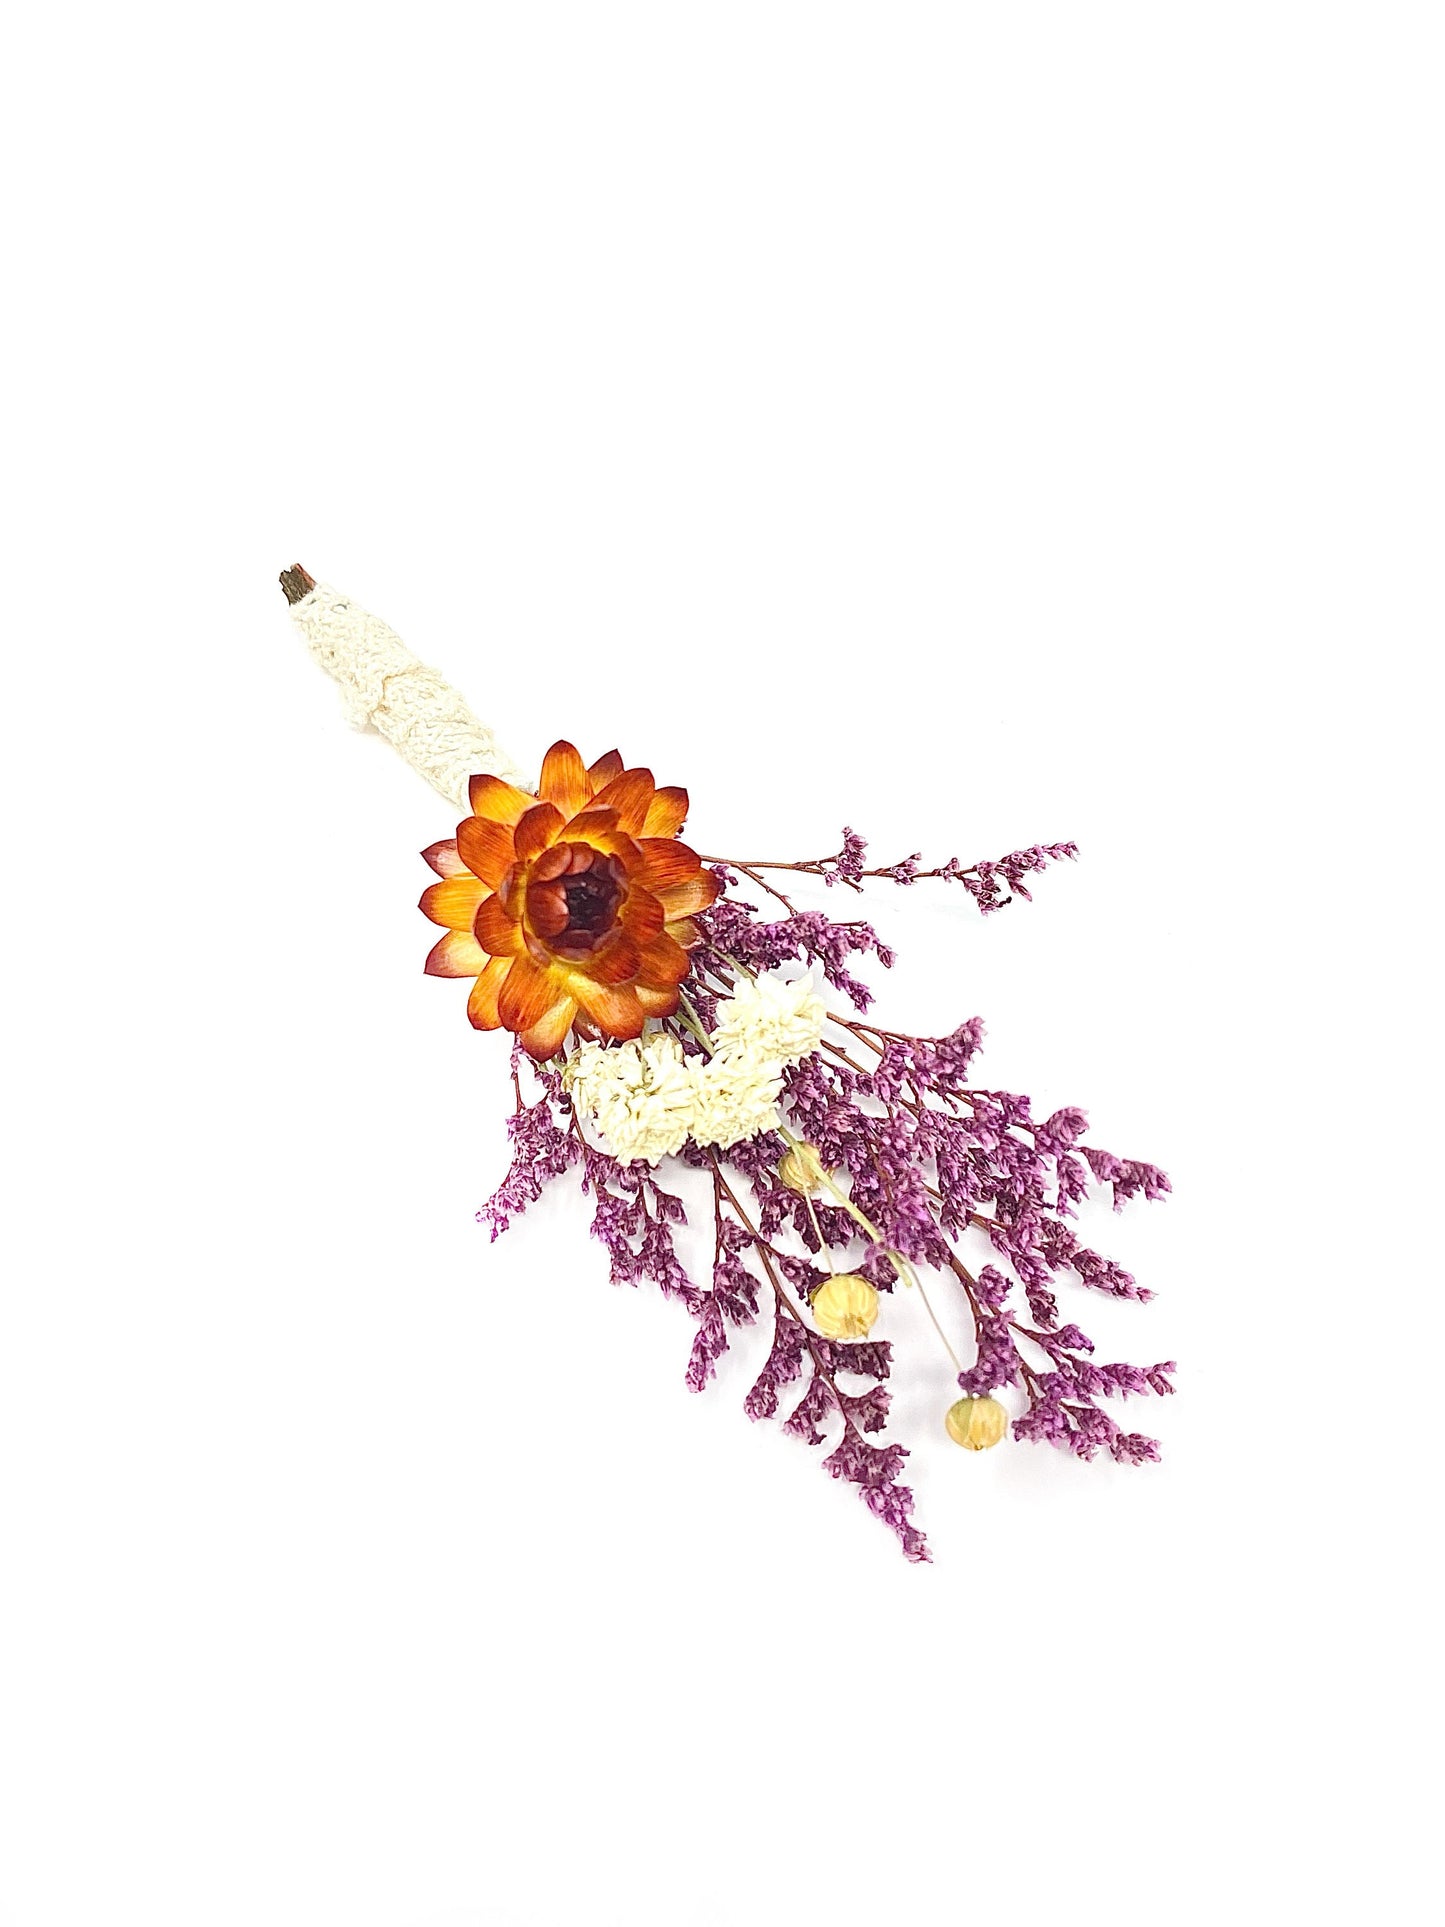 Boutonniere, Dried Flowers, Wedding Accessories, Preserved Floral, Bridal, Strawflower, Purple and Orange, Caspia